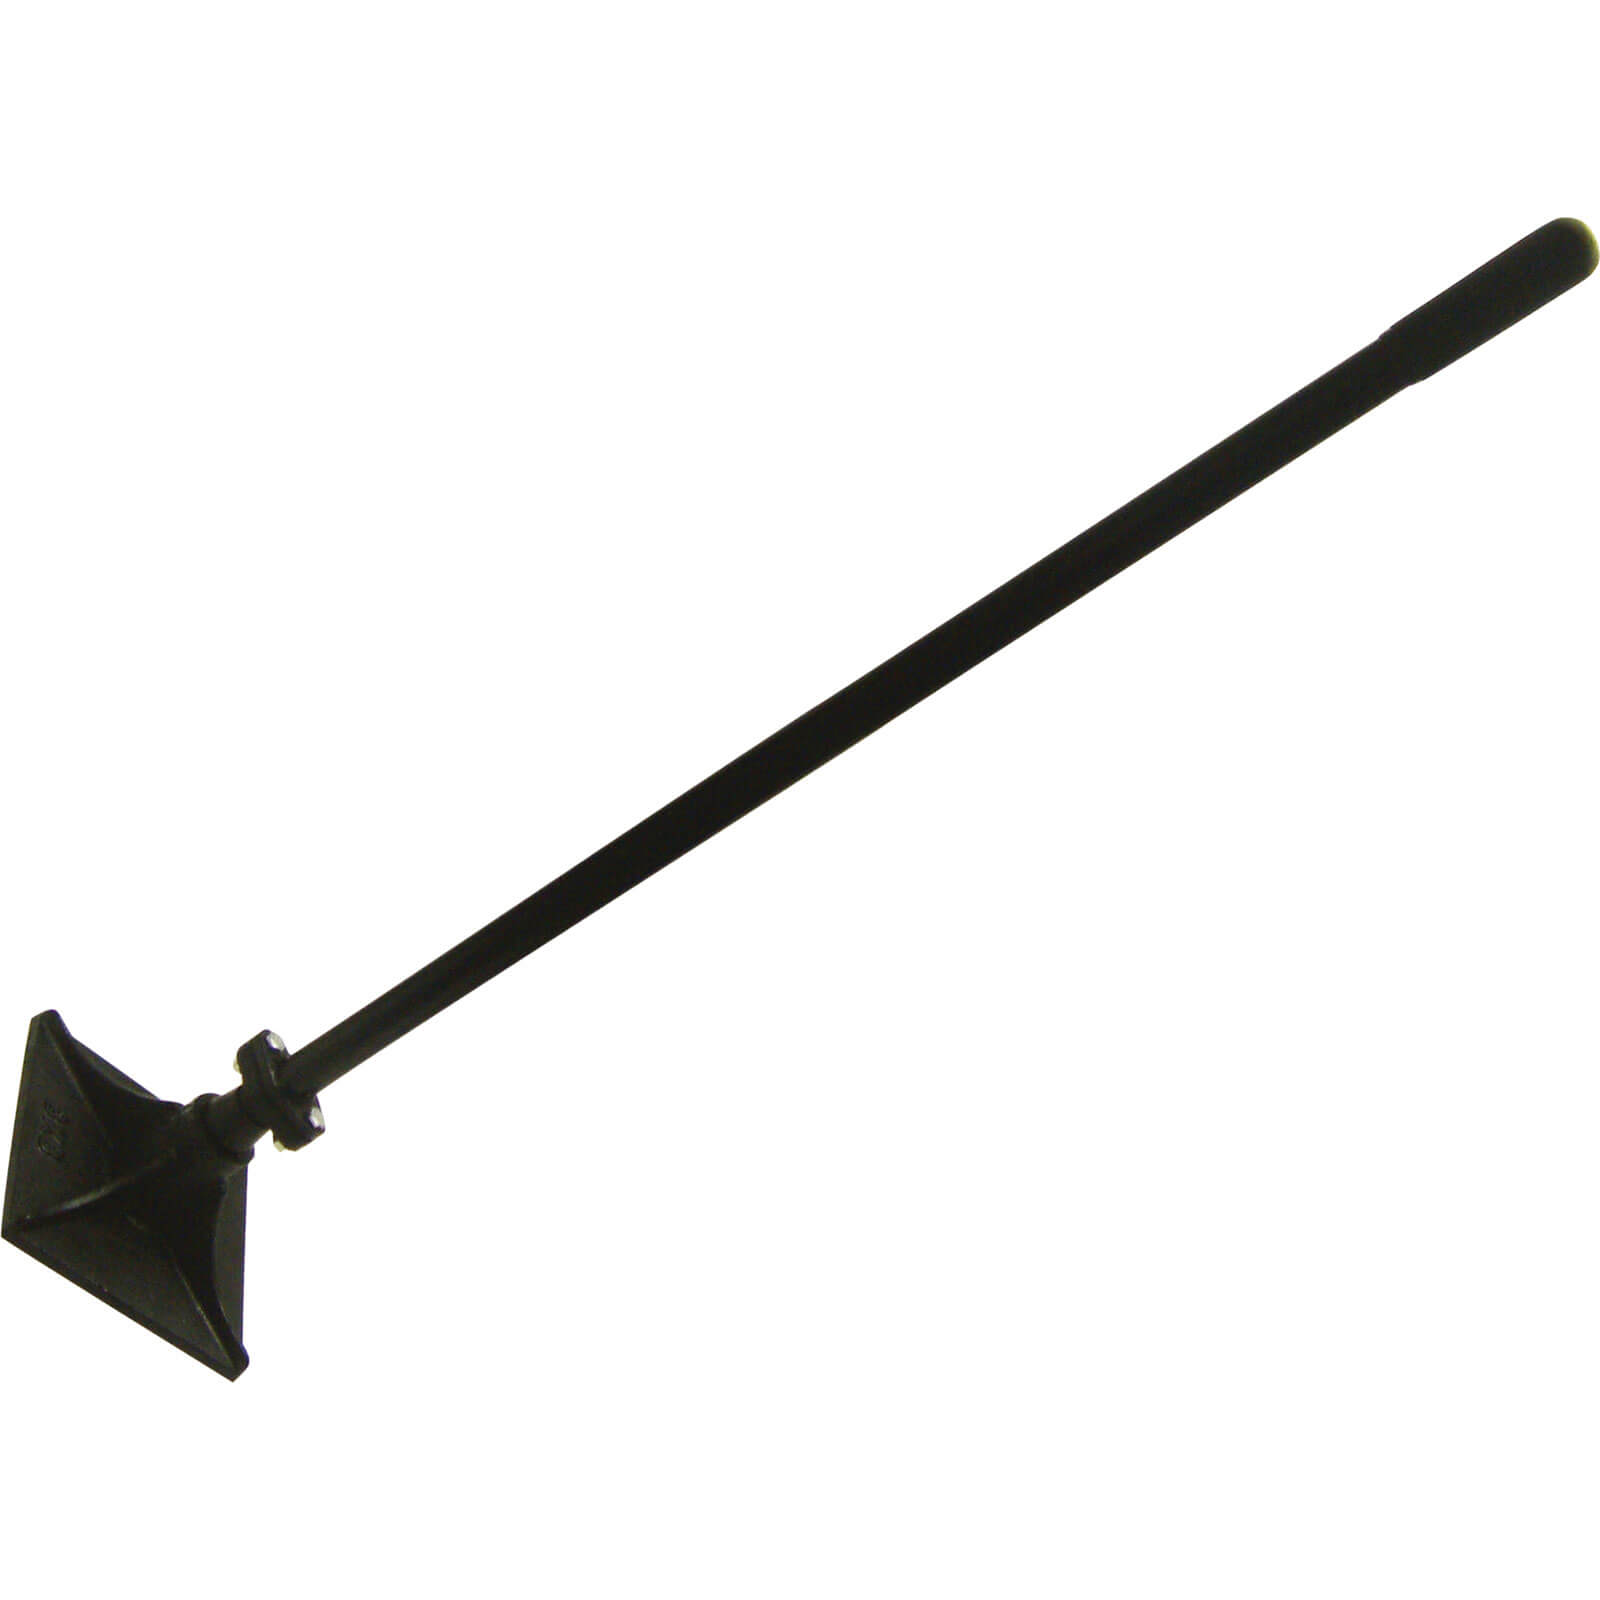 Image of Roughneck Anti Shock Tamper Earth Rammer